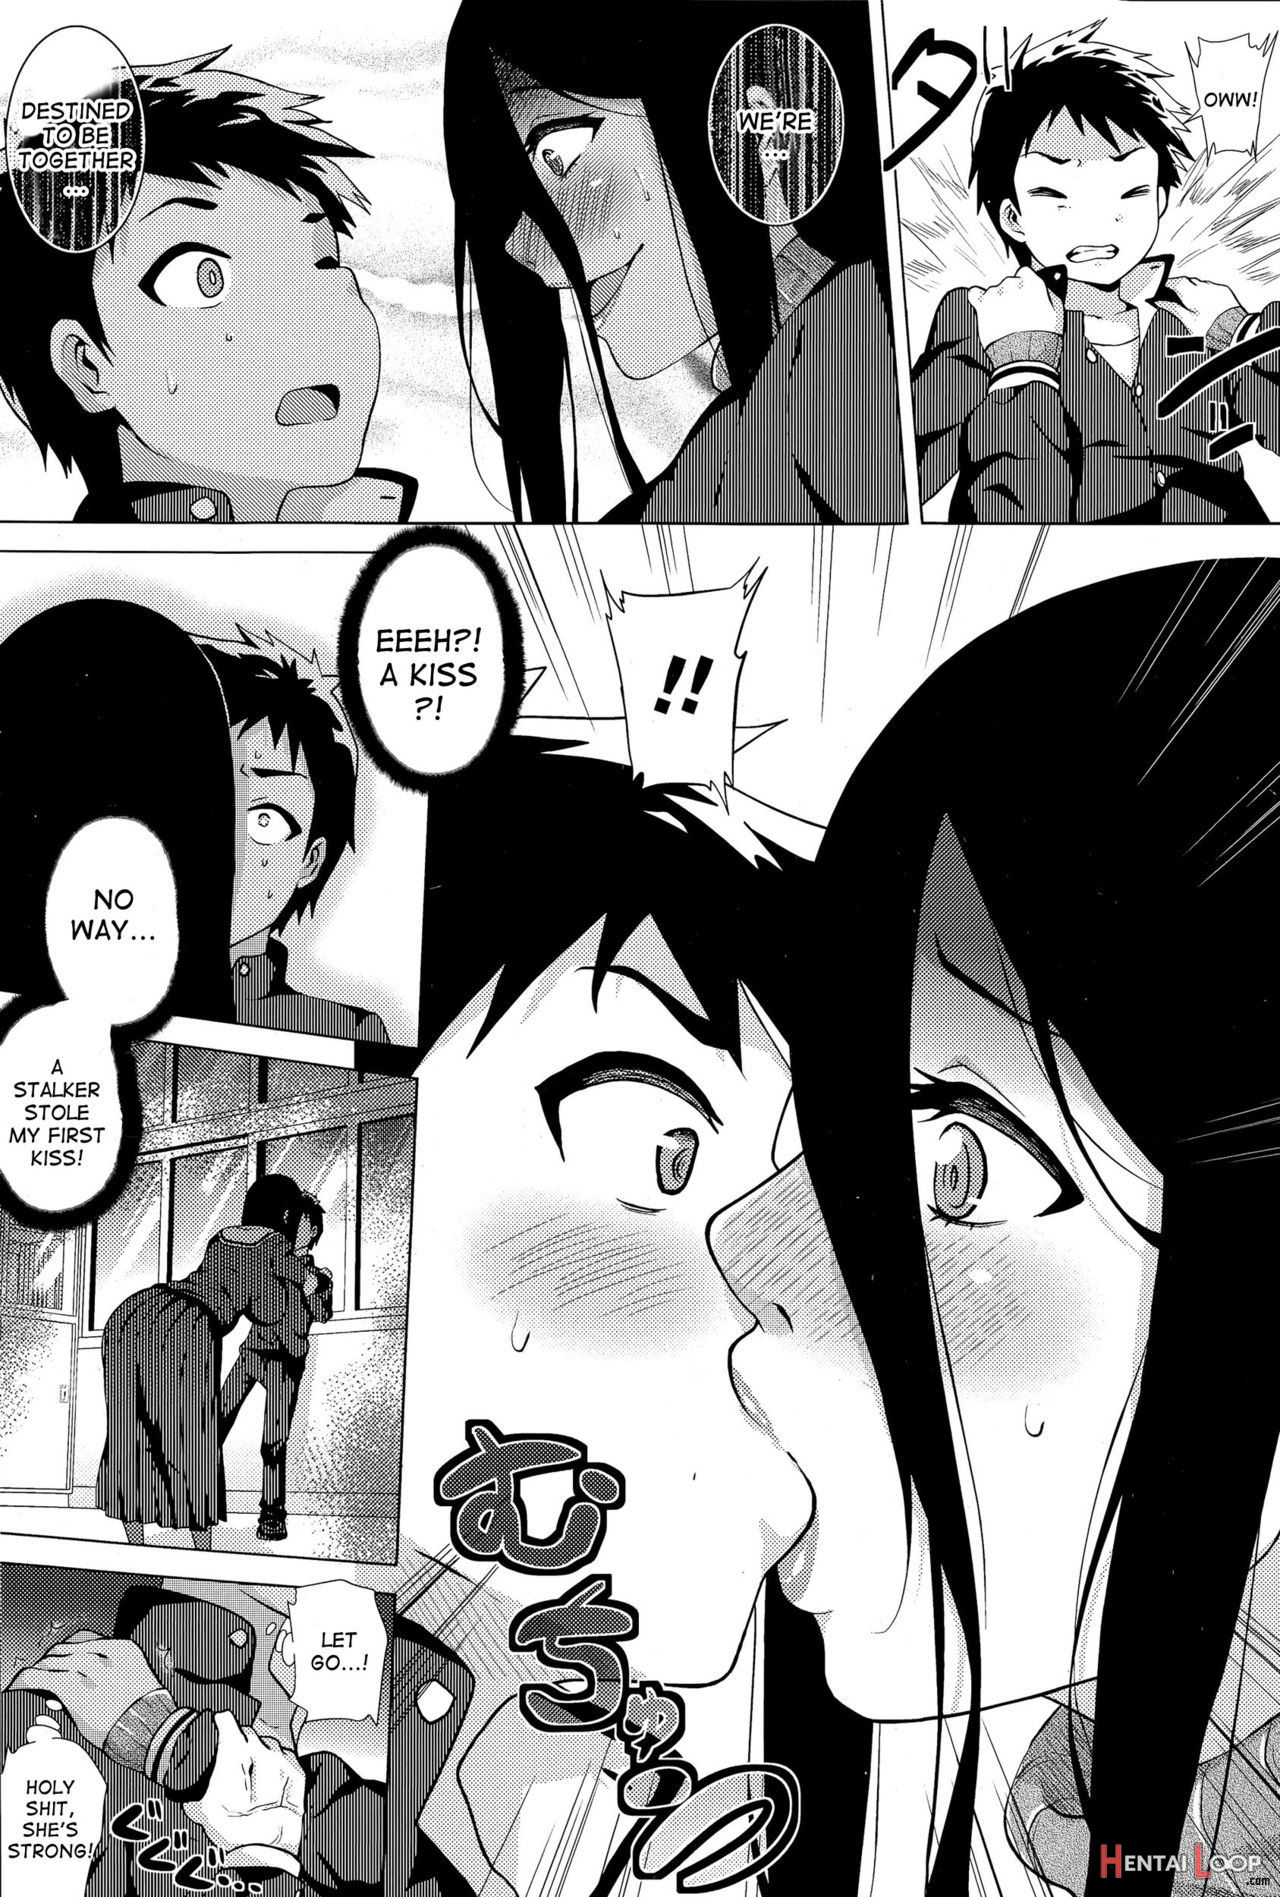 Stalking Girl Ch. 1-3 page 6